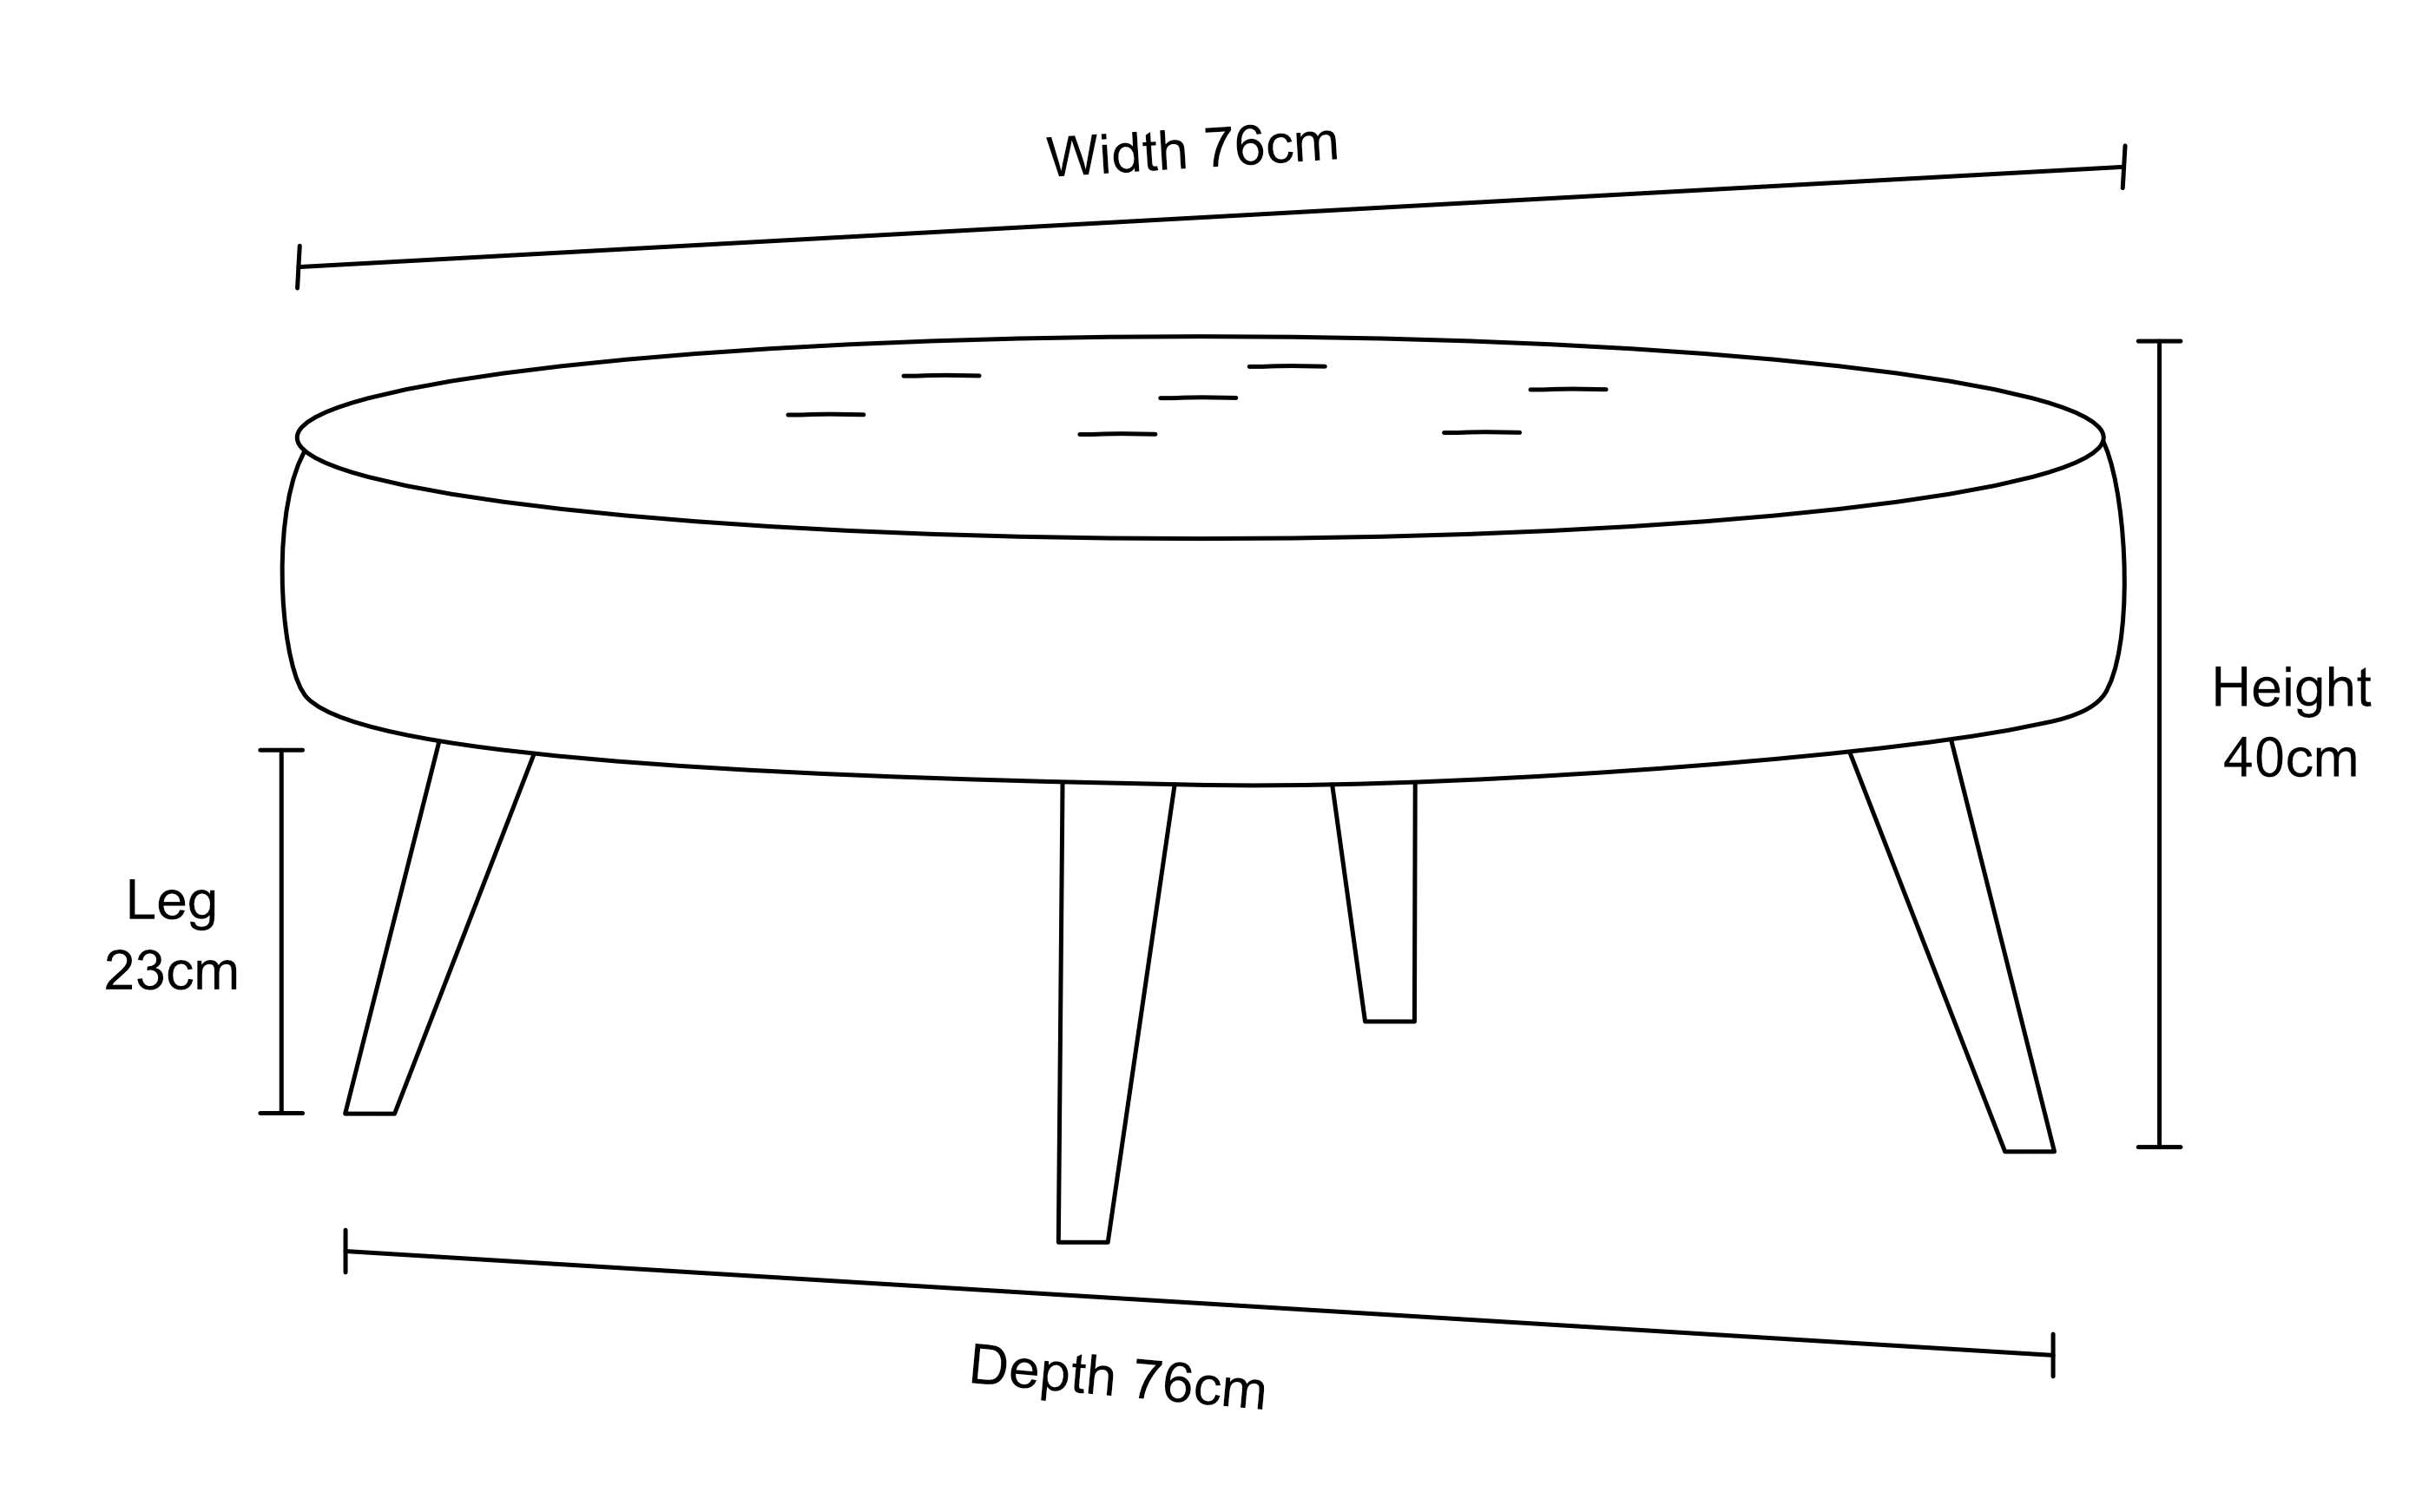 https://www.footstools.co.uk/wp-content/uploads/round-footstool-30x30-dimensions-2.jpg